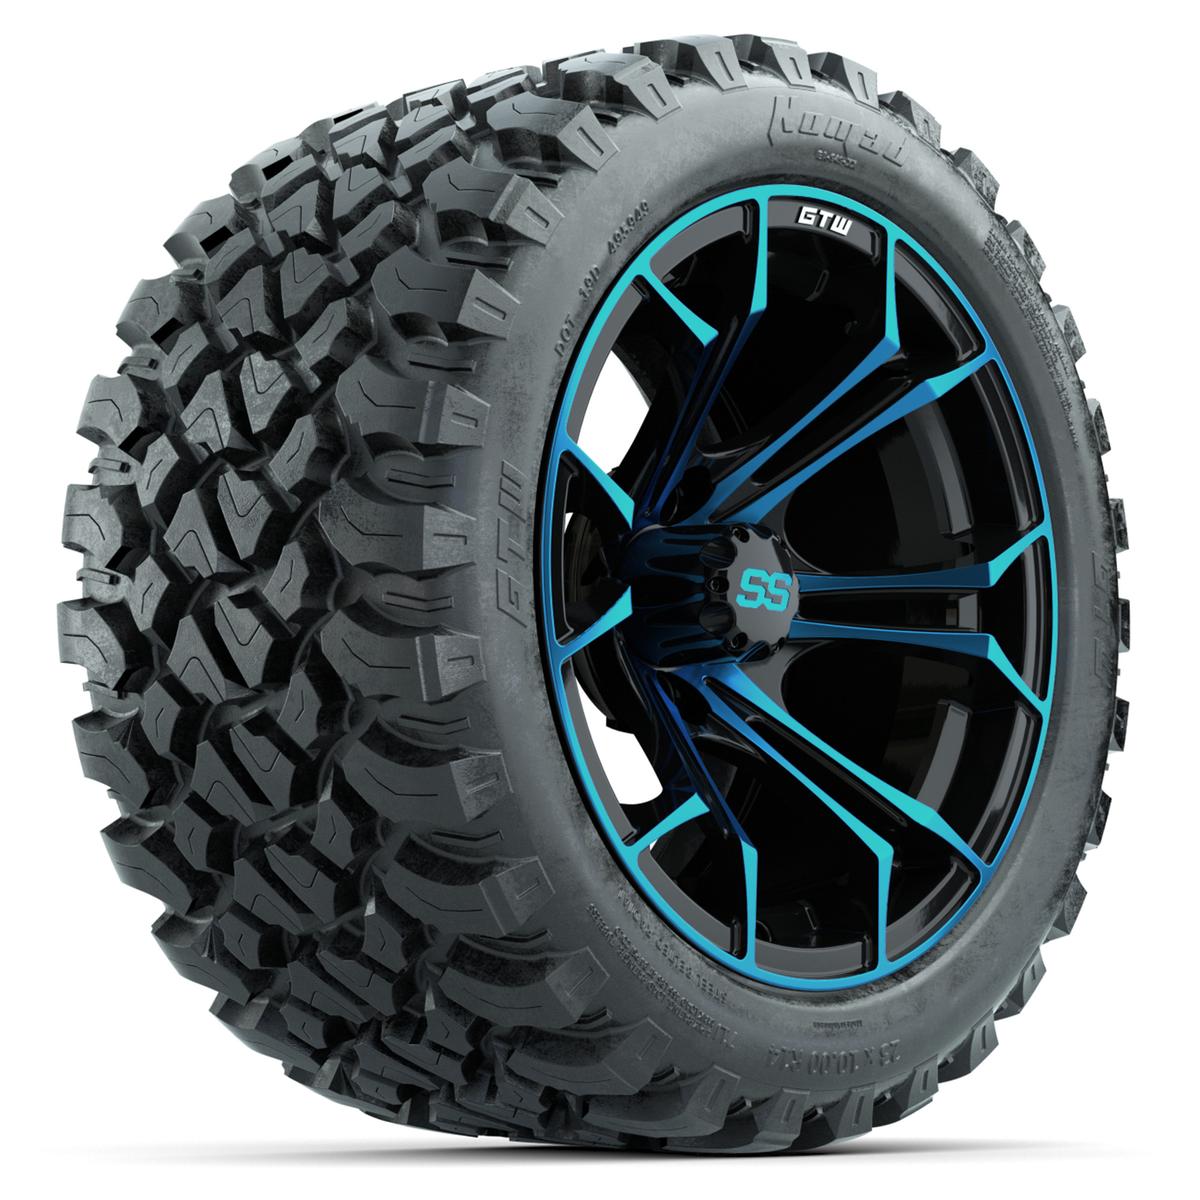 GTW Spyder Blue/Black 14 in Wheels with 23x10-14 GTW Nomad All-Terrain Tires – Full Set